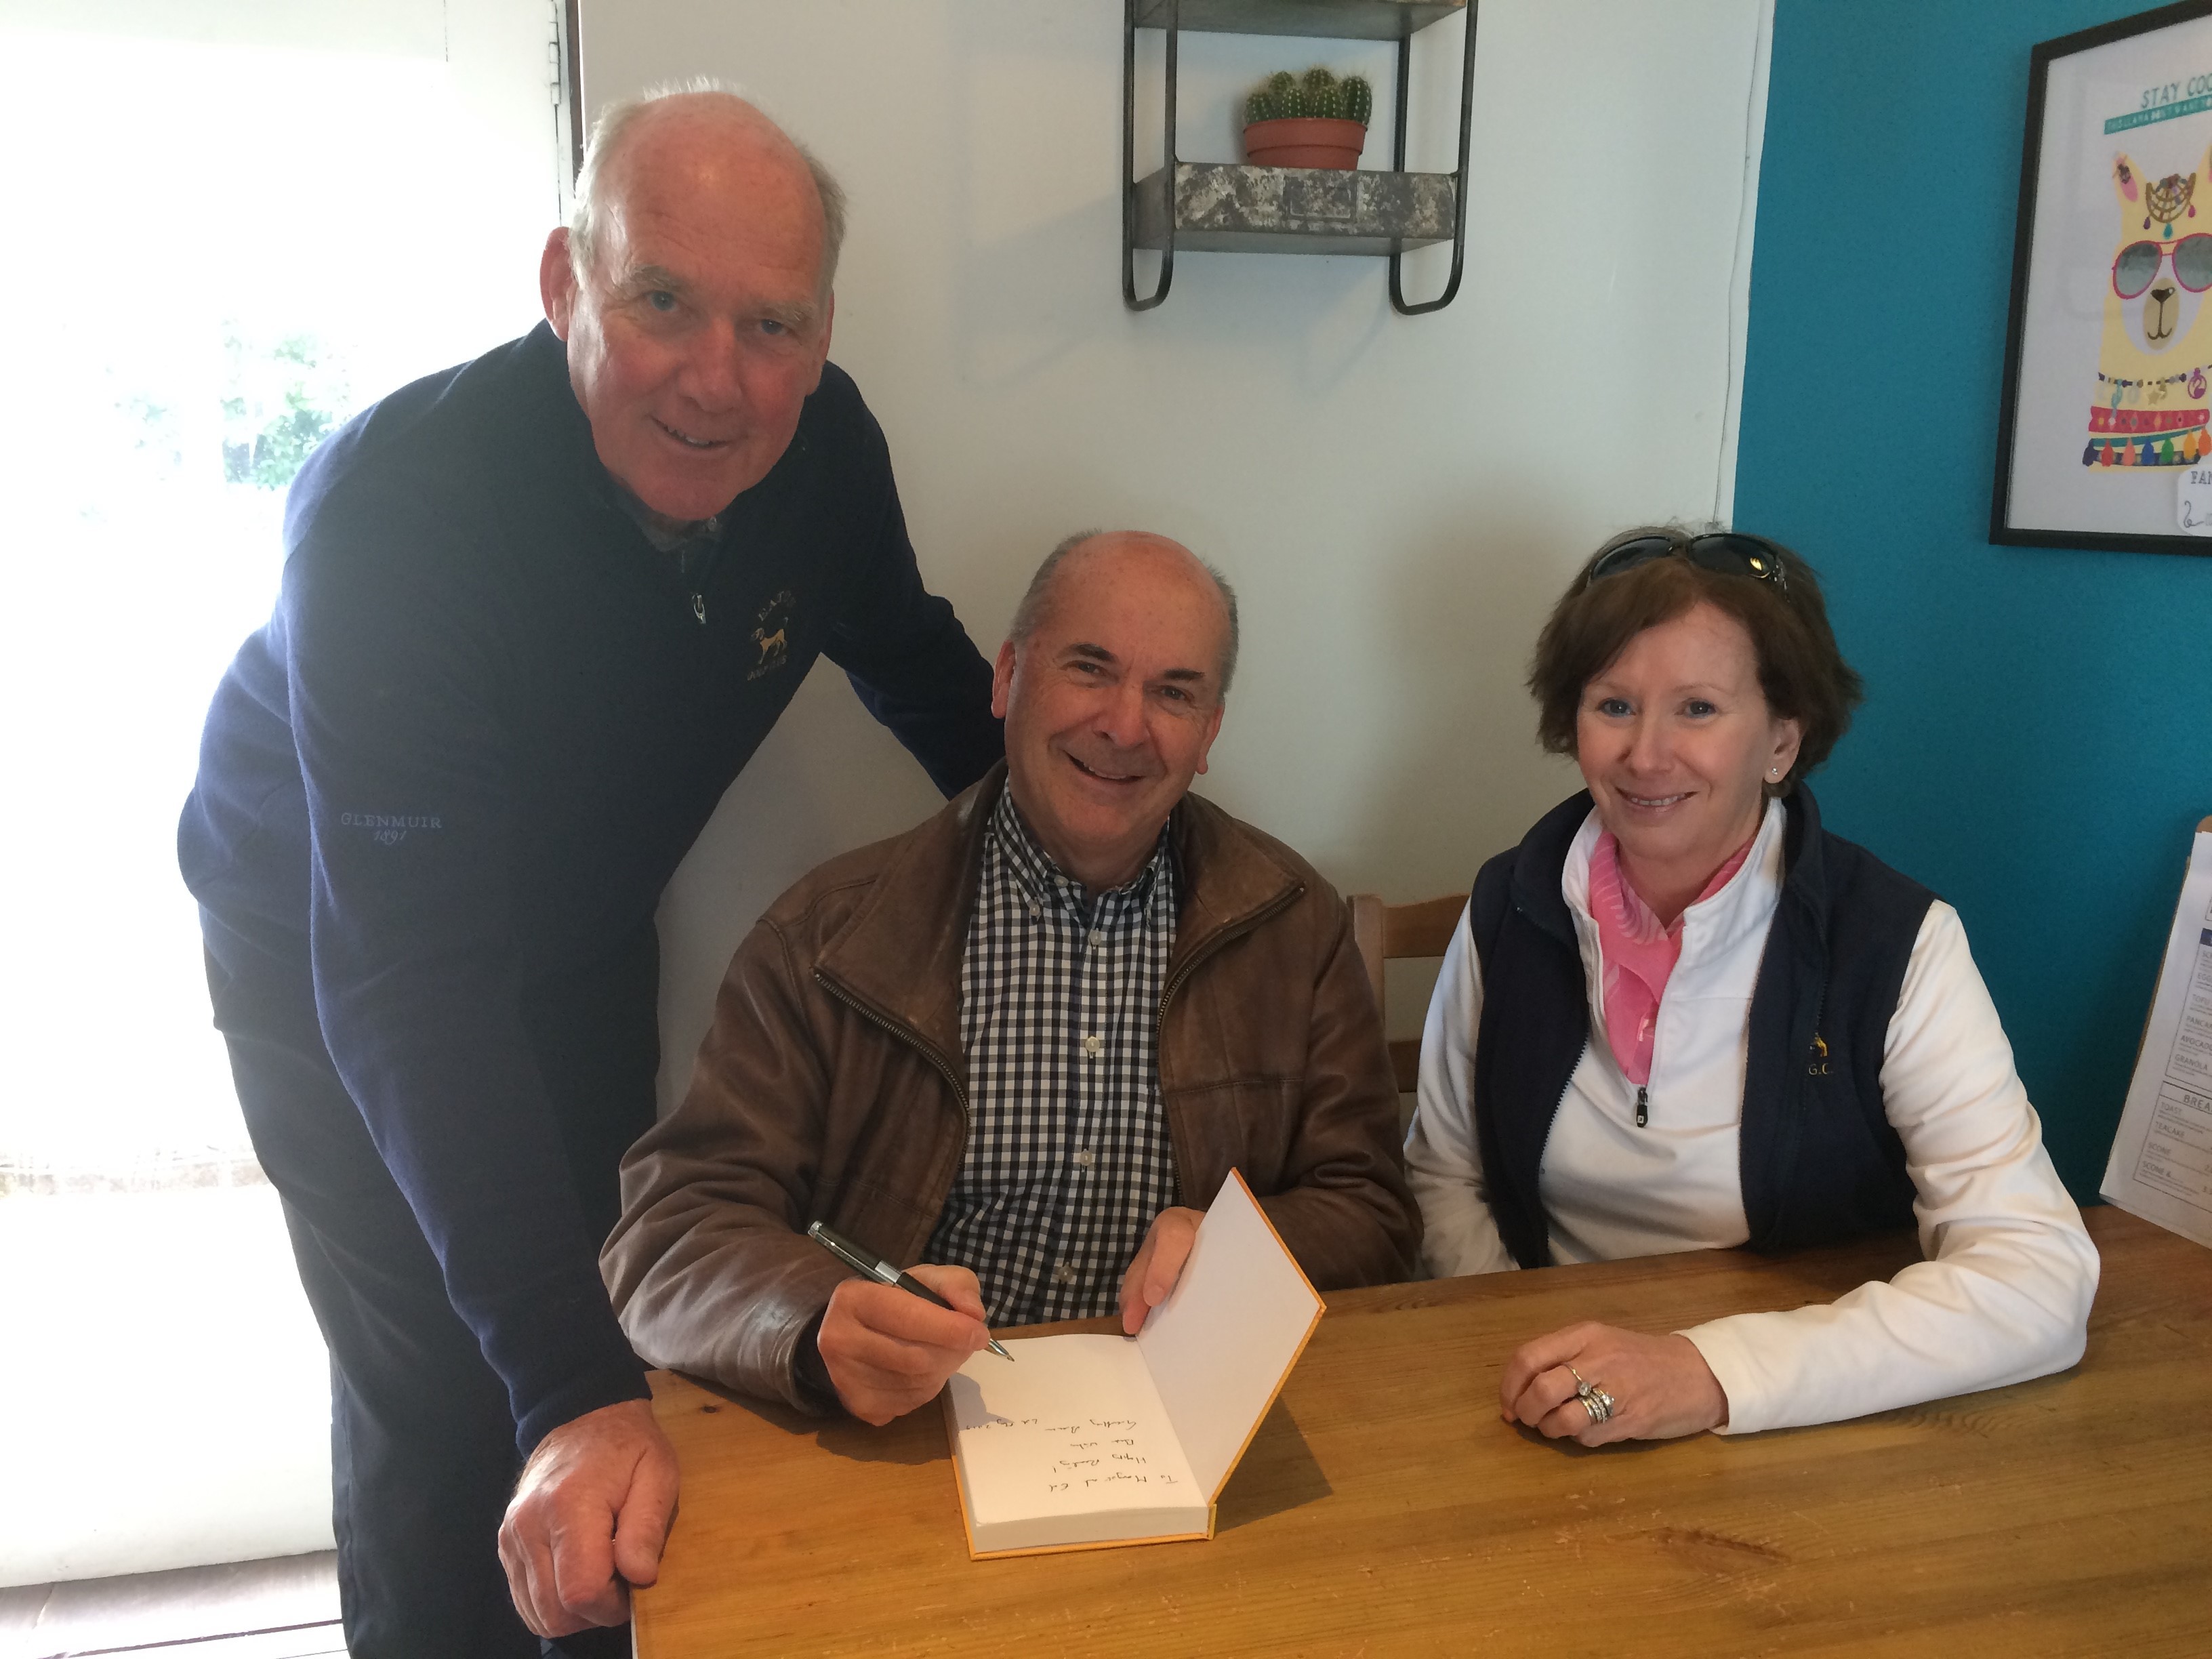 Acclaimed Author Geoffrey Benson Attended a Book Signing Event at Applegate Farm Shop and Cafe  